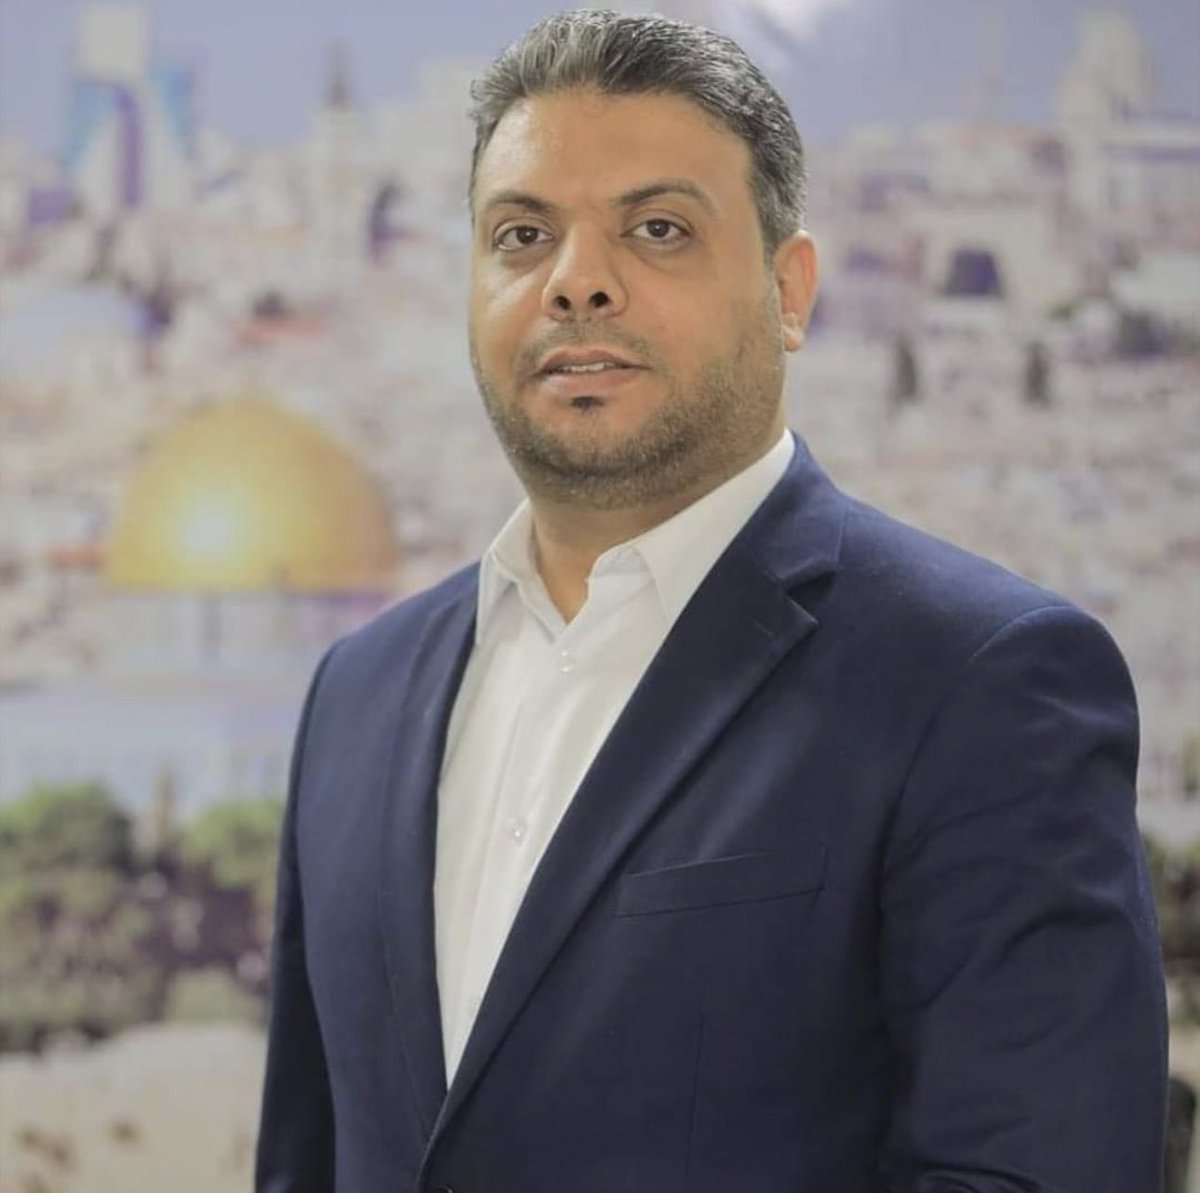 Israel assassinates the mayor of Al-Maghazi refugee camp in the middle of the Gaza Strip. A piece of news has gone unnoticed. A democratically elected civilian mayor with no political affiliation, carrying out humanitarian duties!